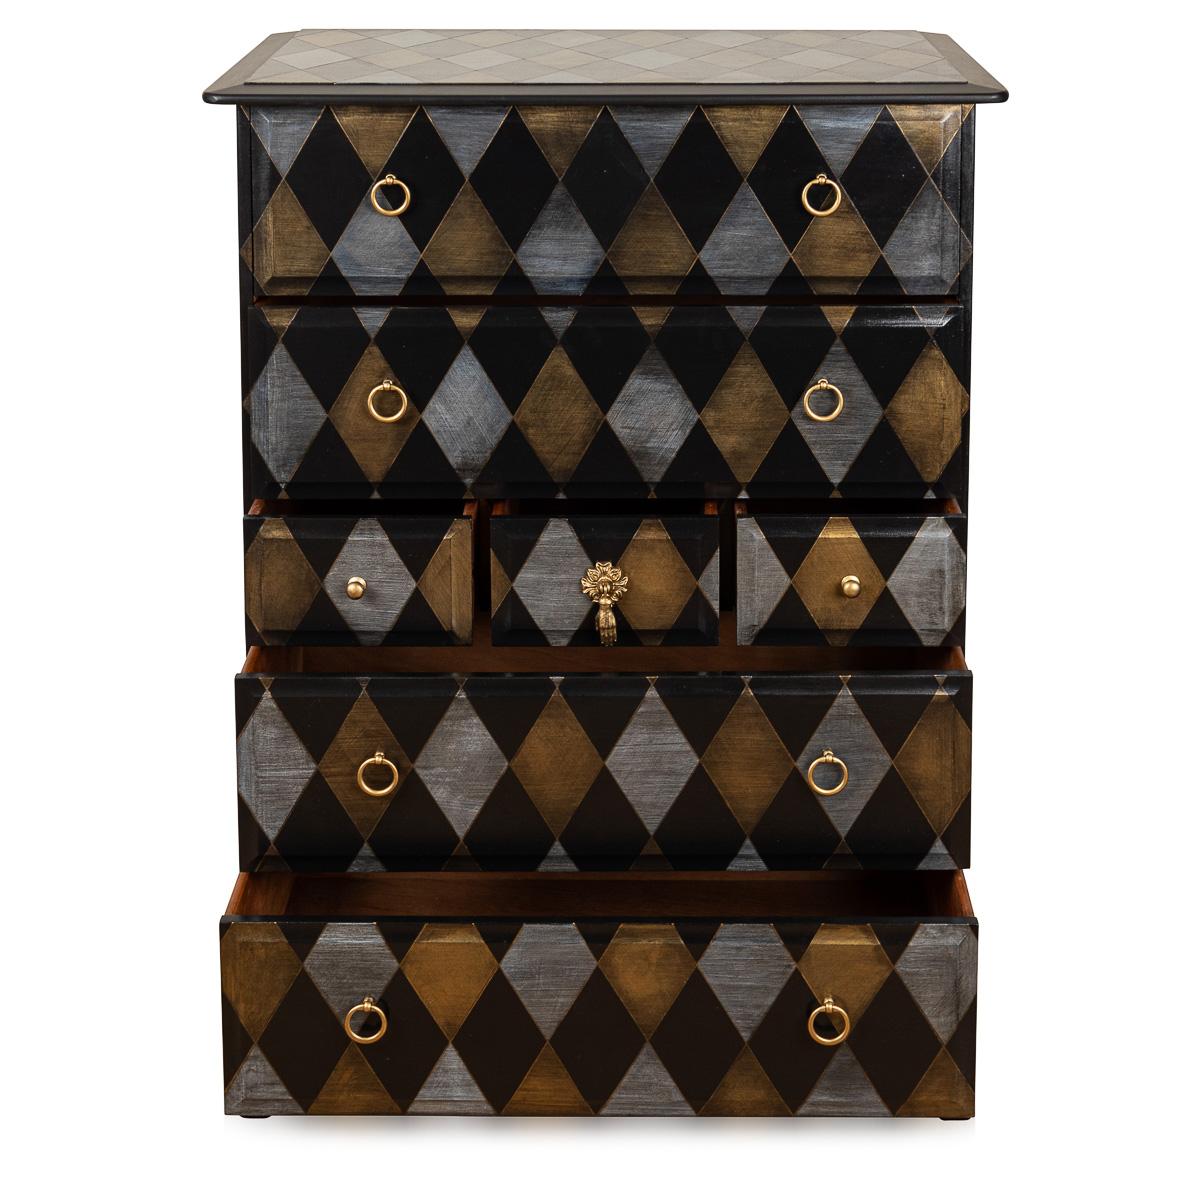 Mid-Century Modern Stag Minstrel Chest Of Drawers Handpainted With 'Venetian Harlequin' Design For Sale